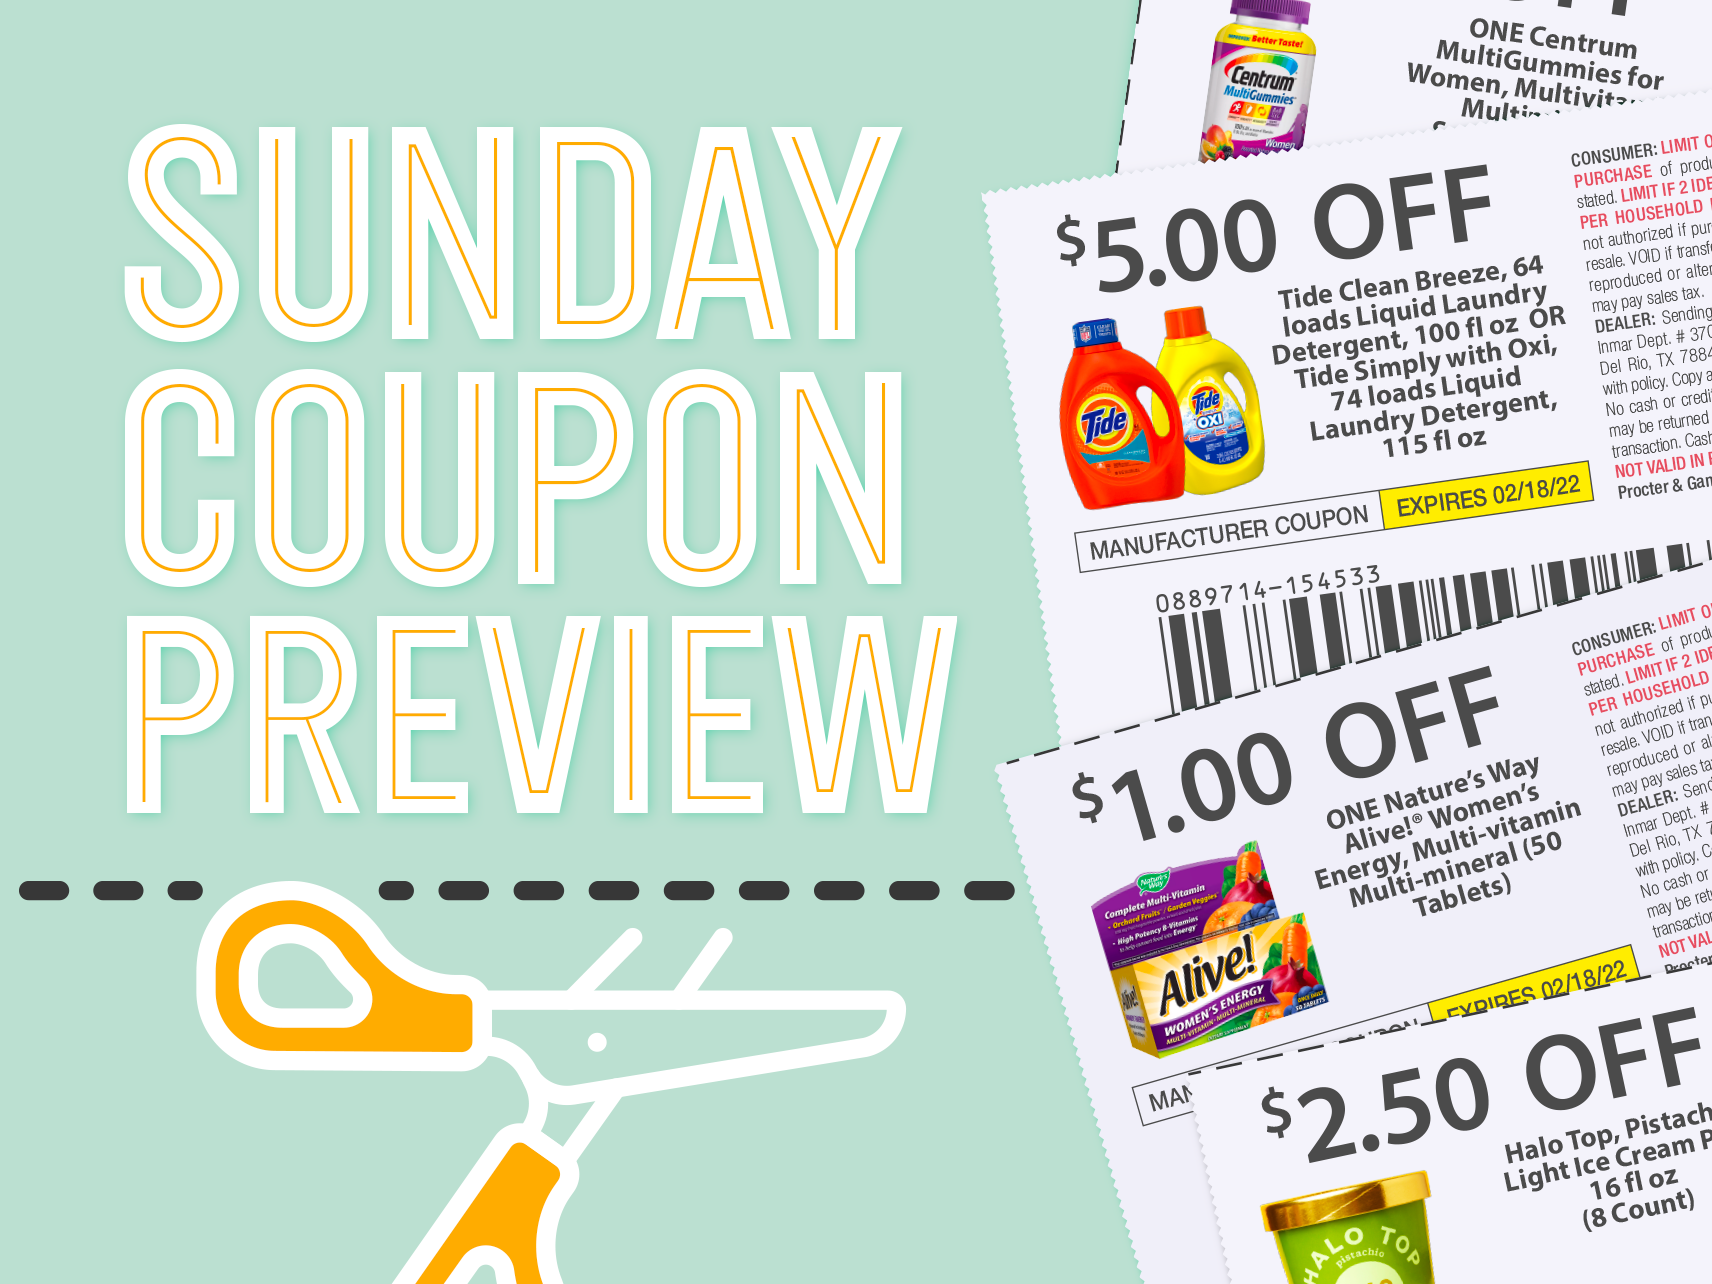 Sunday Coupon Preview For 11/13 – Two Inserts